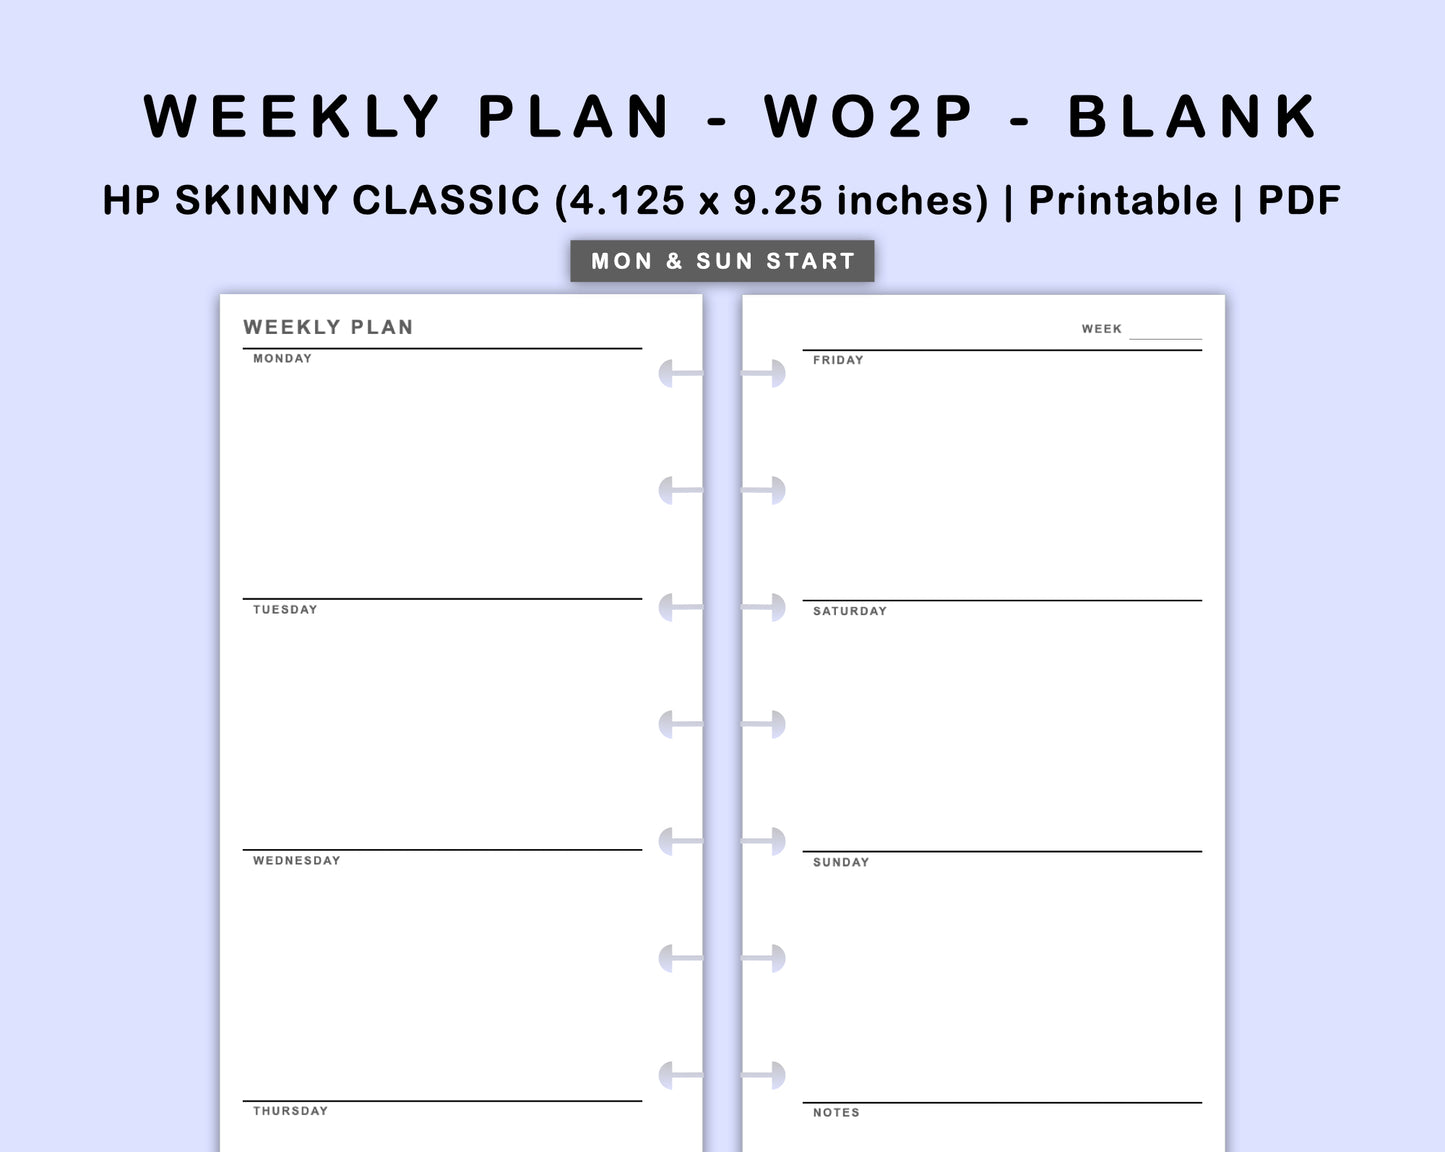 Skinny Classic HP Inserts - Weekly Plan - WO2P - Blank